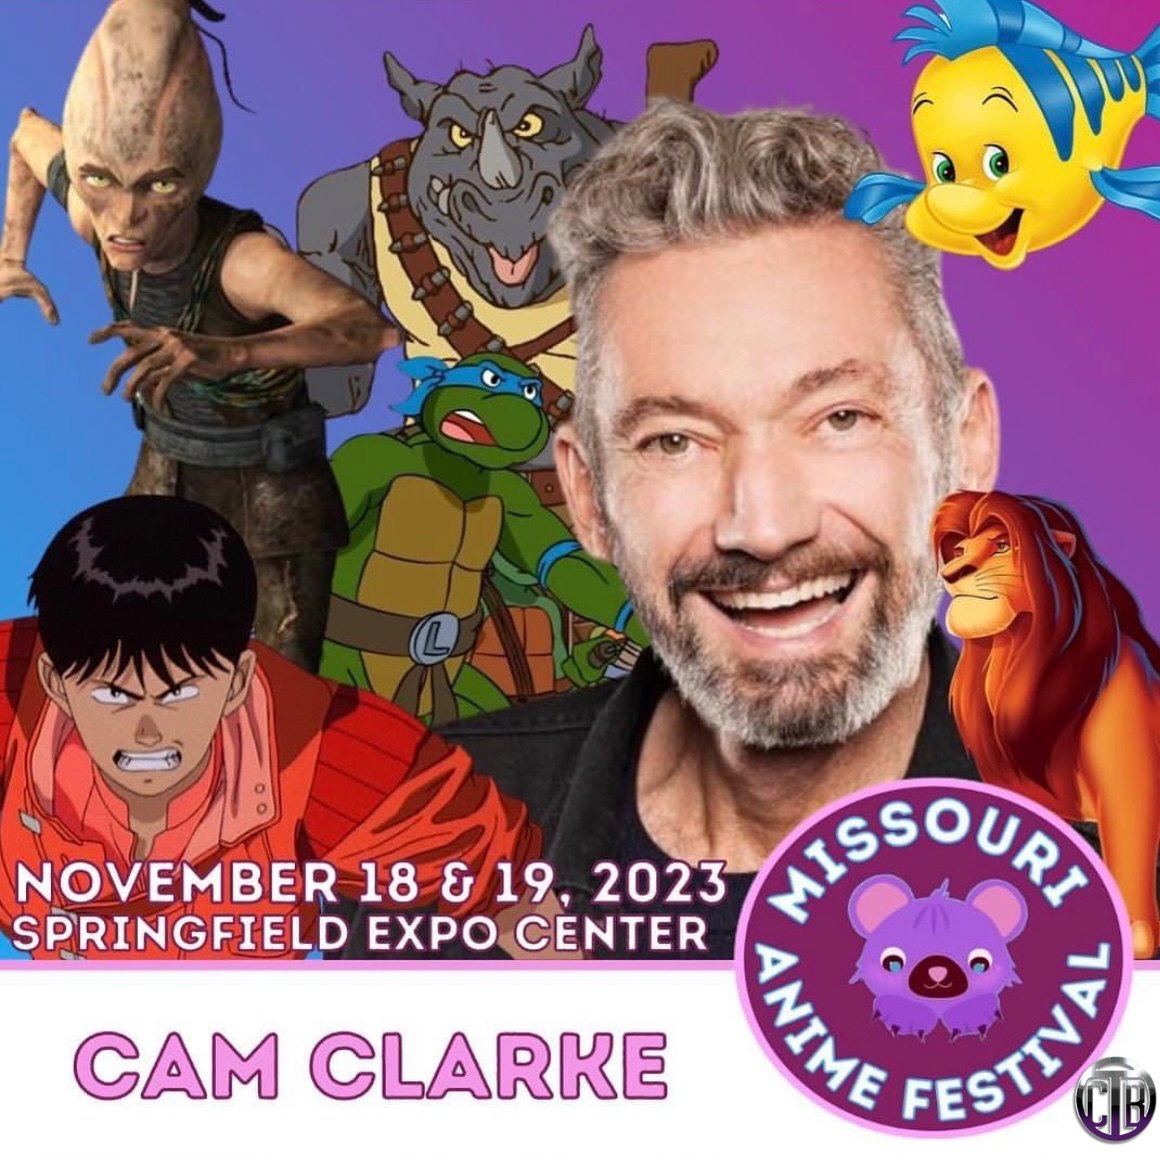 Join me this weekend at Missouri Anime Fest! I look forward to seeing you all! #TMNT #Robotech #HeMan #LiquidSnake #MetalGeatSolid #MGS #Akira